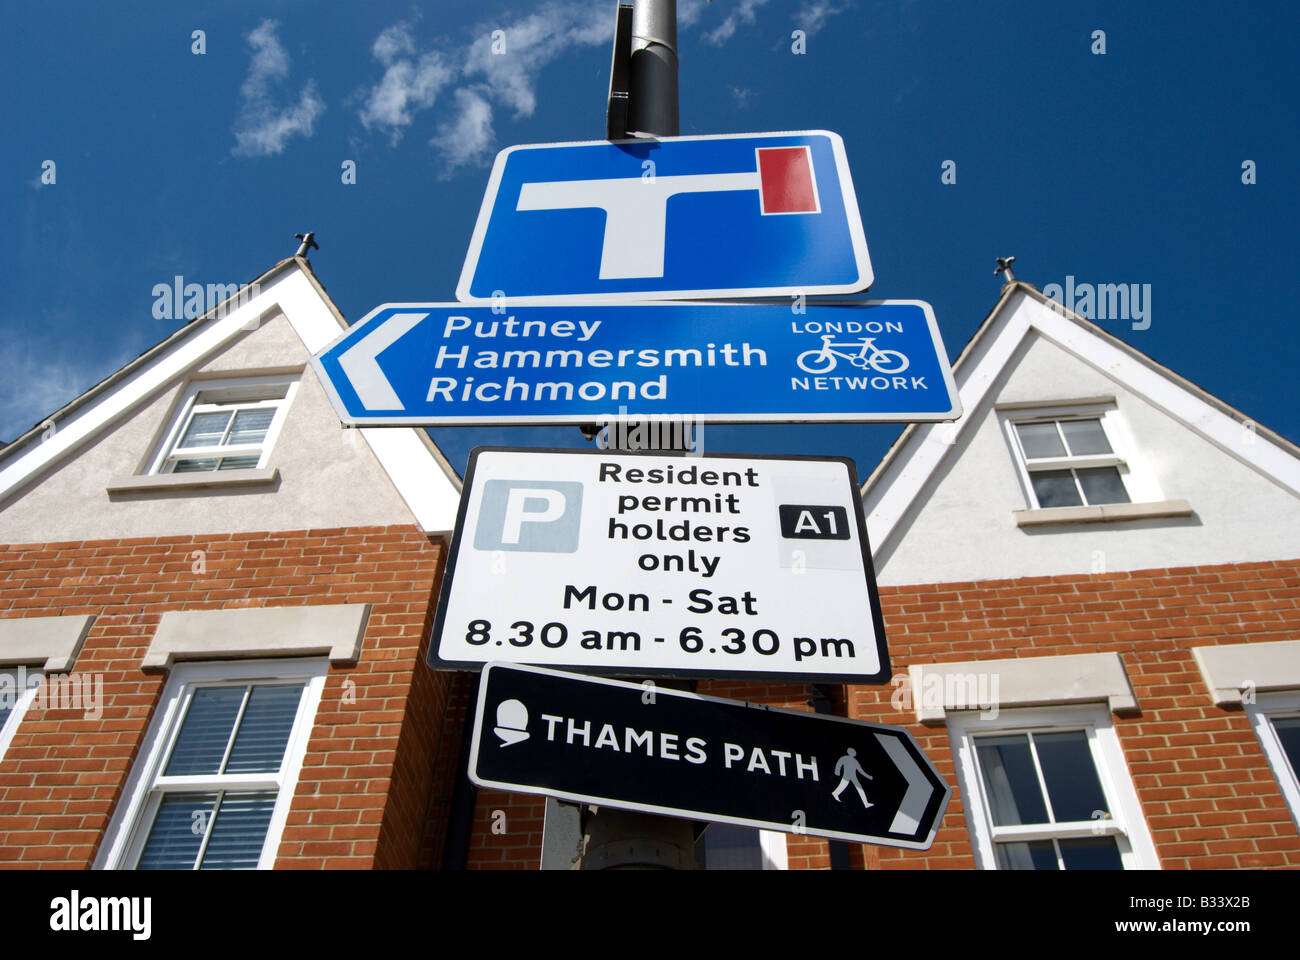 parking, cycling and walking street signs in putney, southwest london, england Stock Photo